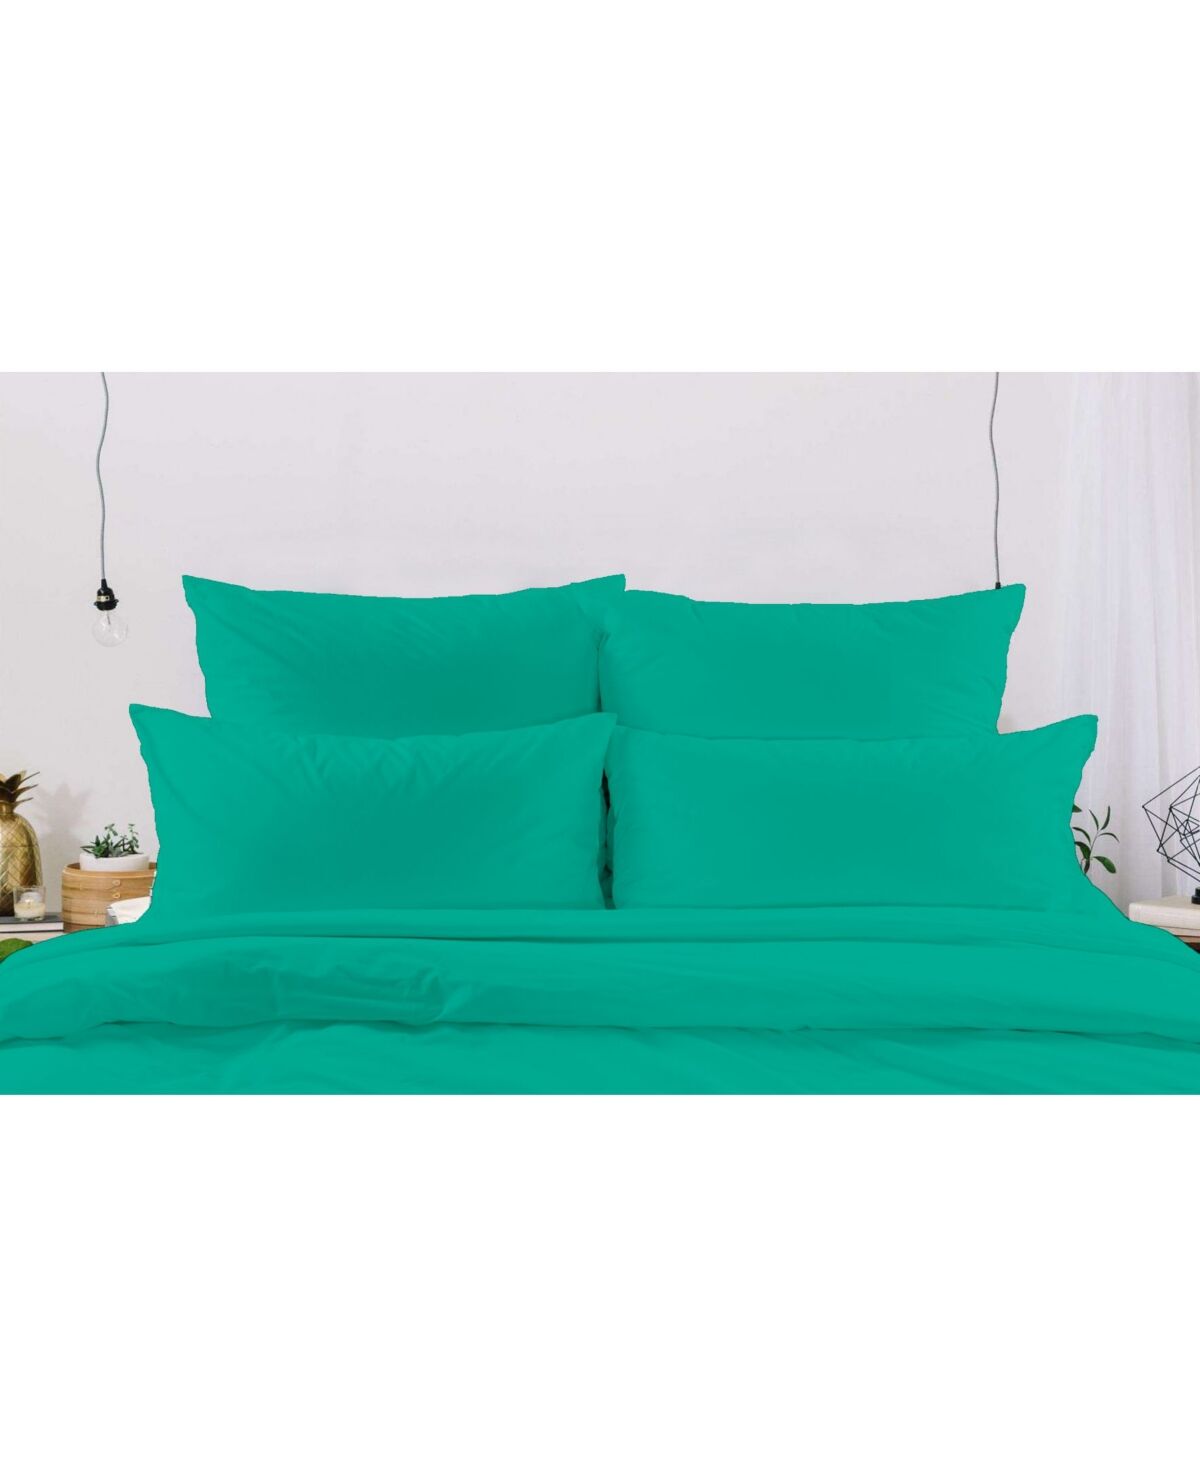 Tagco Usa Luxury Home Super-Soft 1600 Series Double-Brushed 6 Piece Bed Sheets Set - King - Turquoise